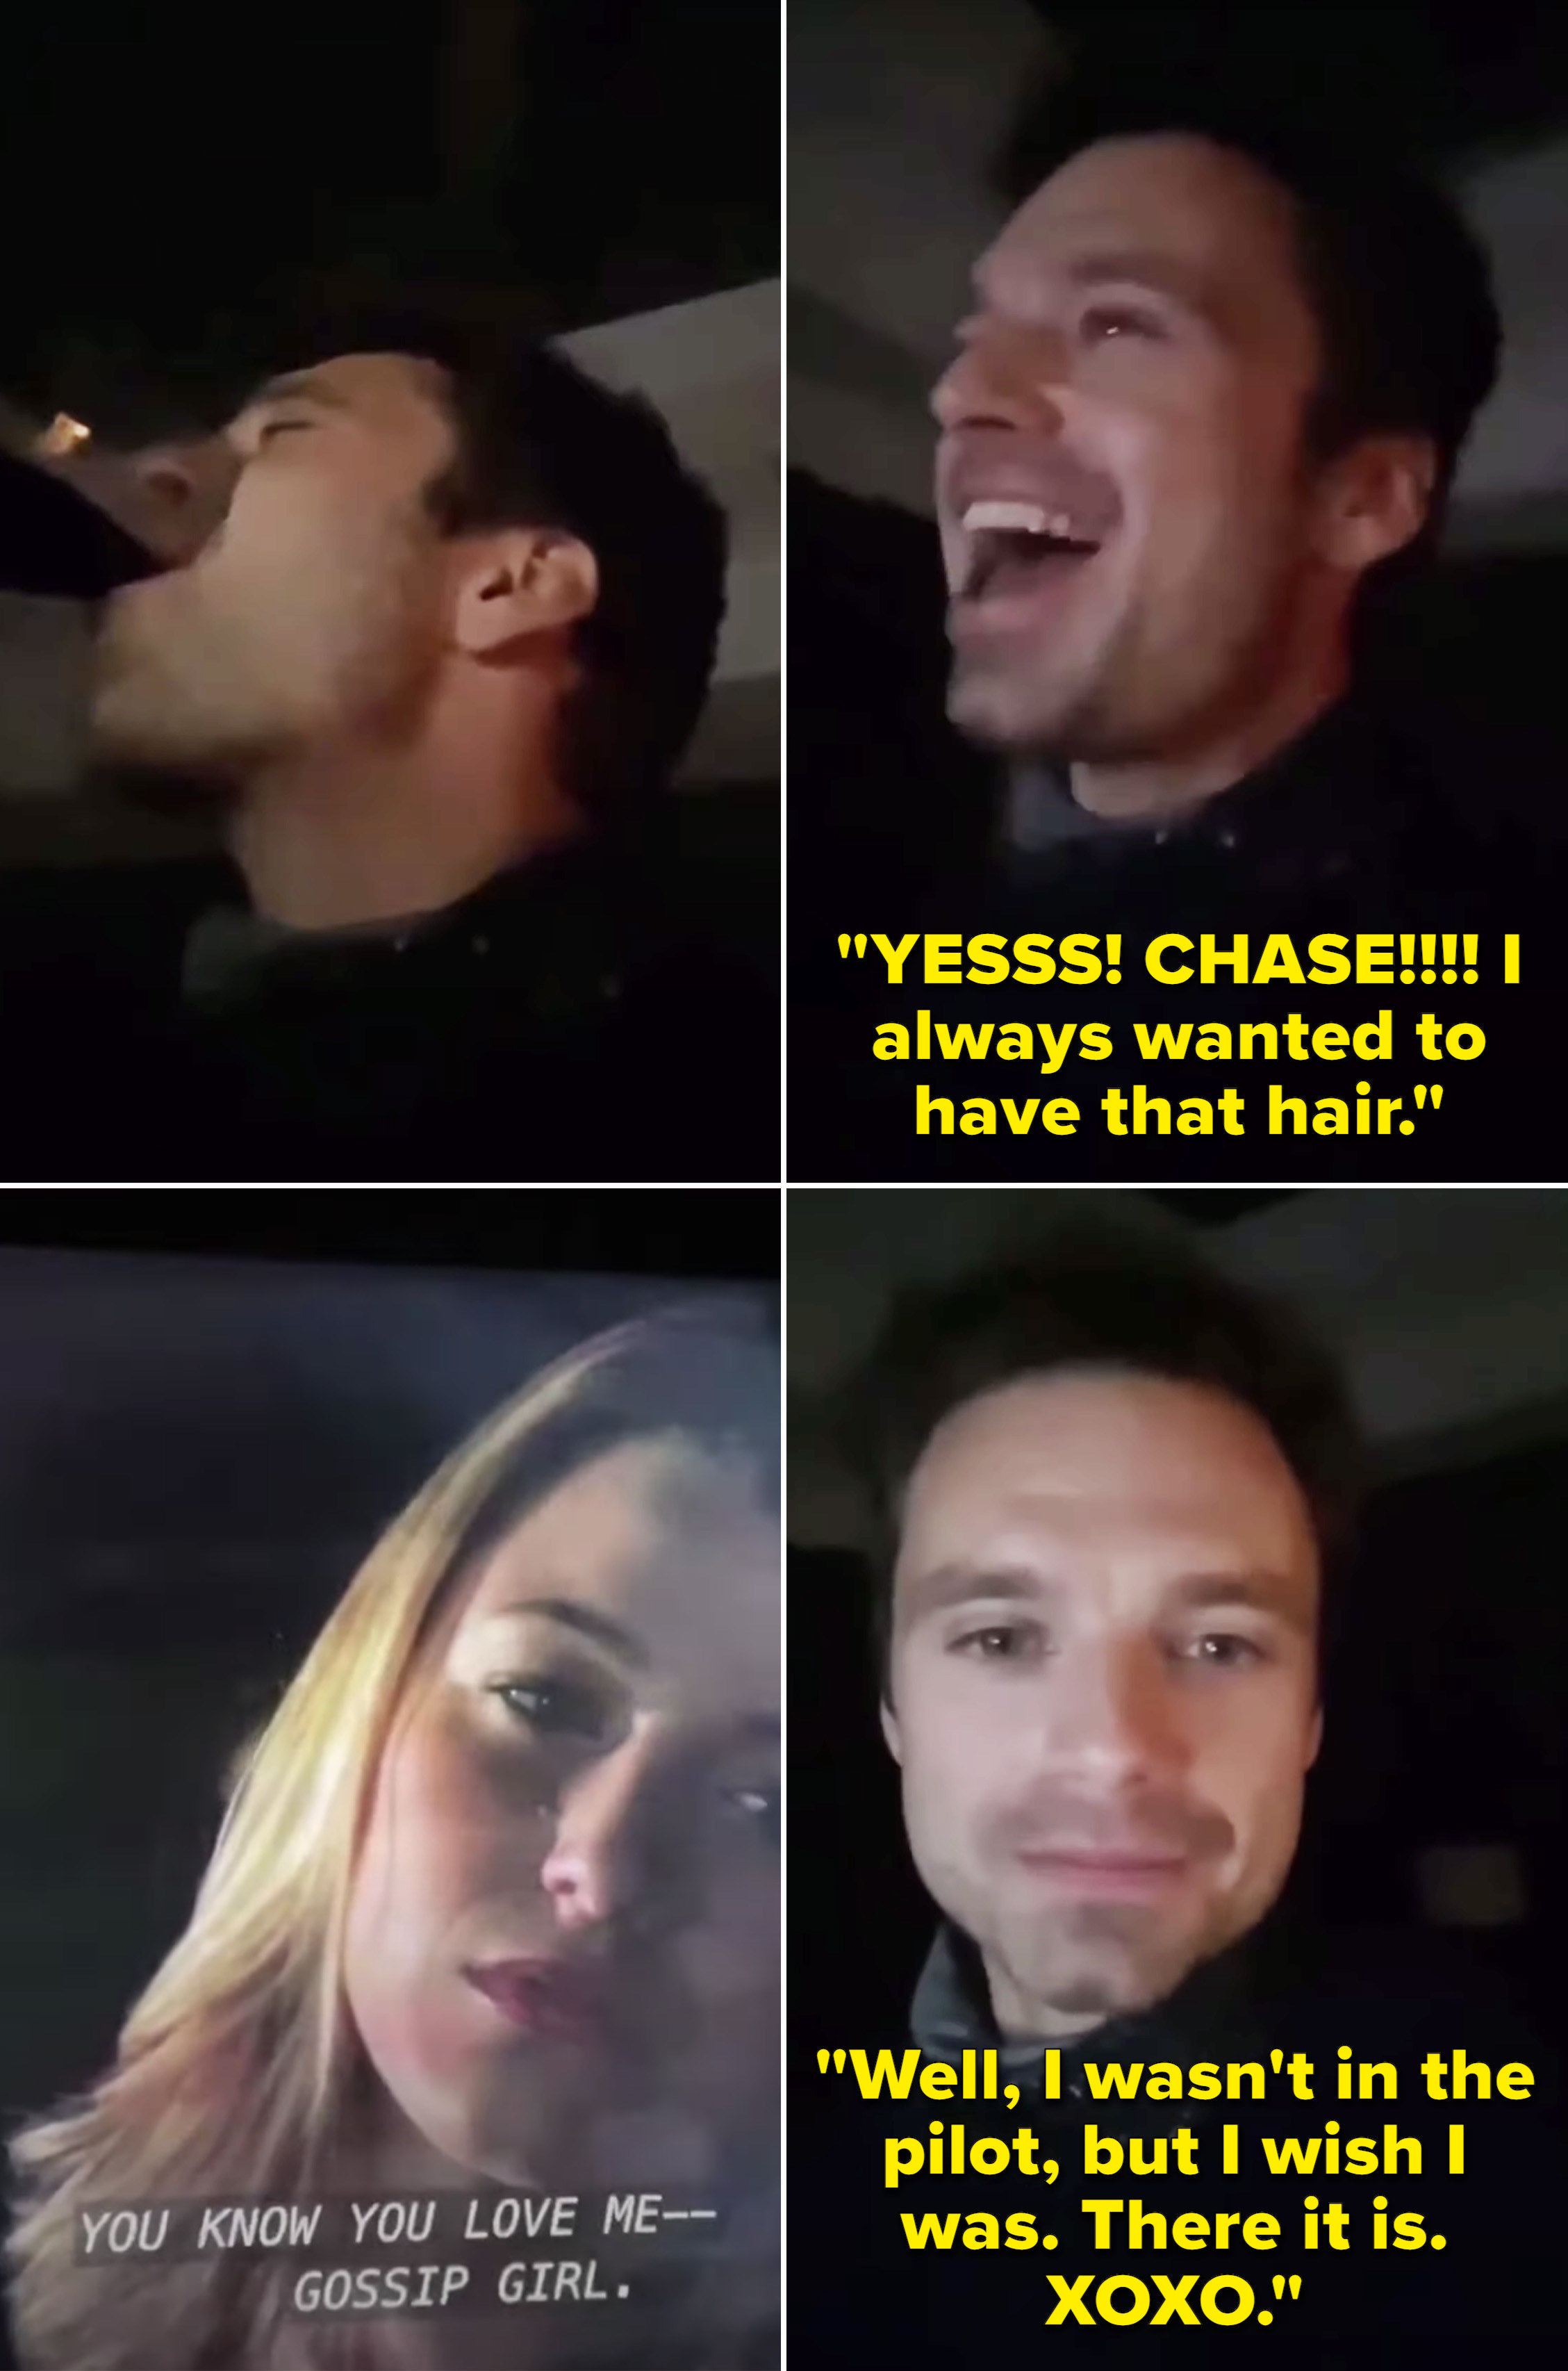 Sebastian screaming about Chase Crawford and saying he wishes he was in the pilot